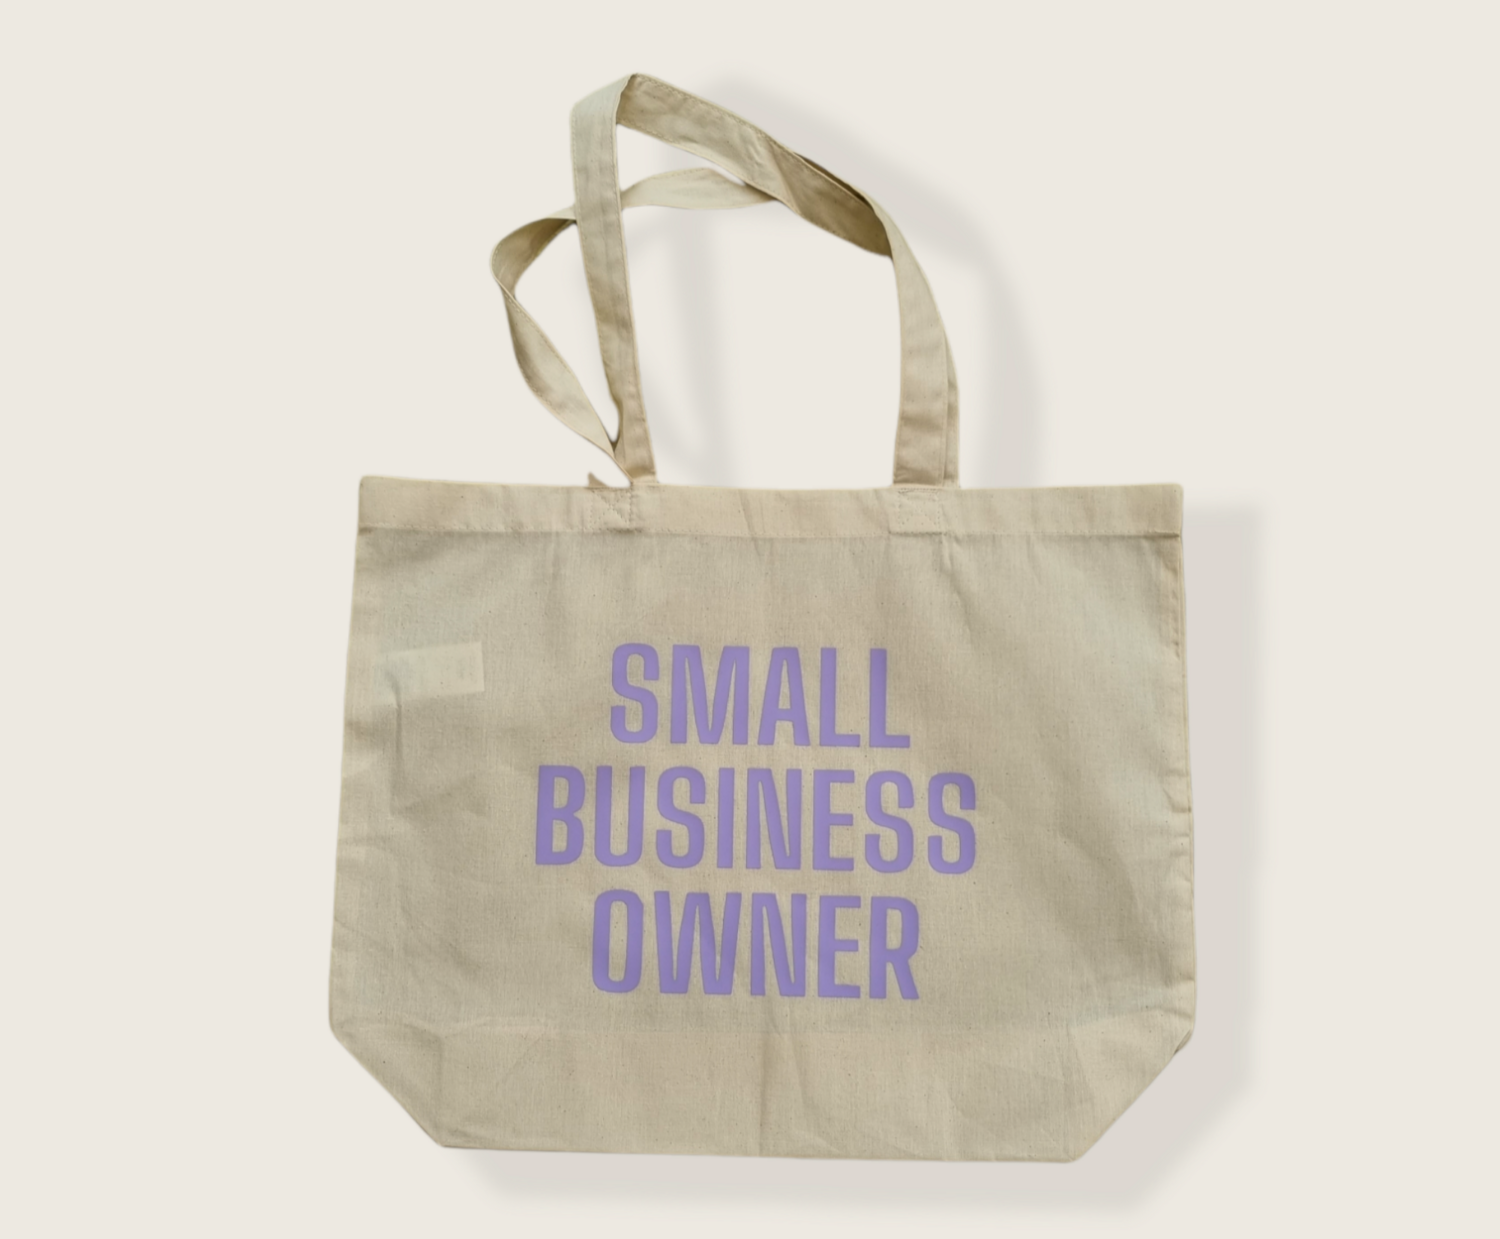 Small Business Owner Tote